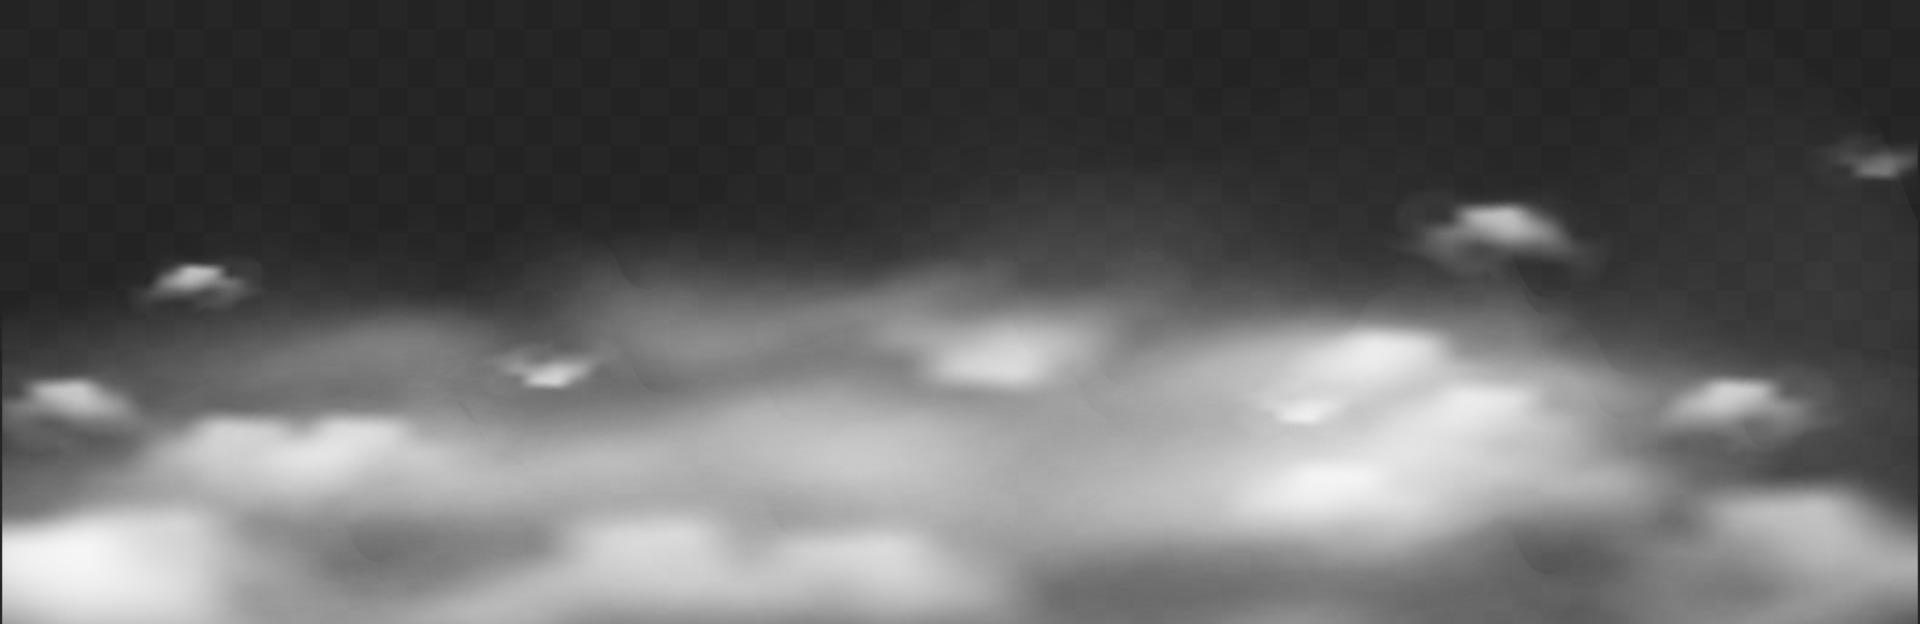 Horizontal realistic fog effect. Mist or cloud in motion overlay vector